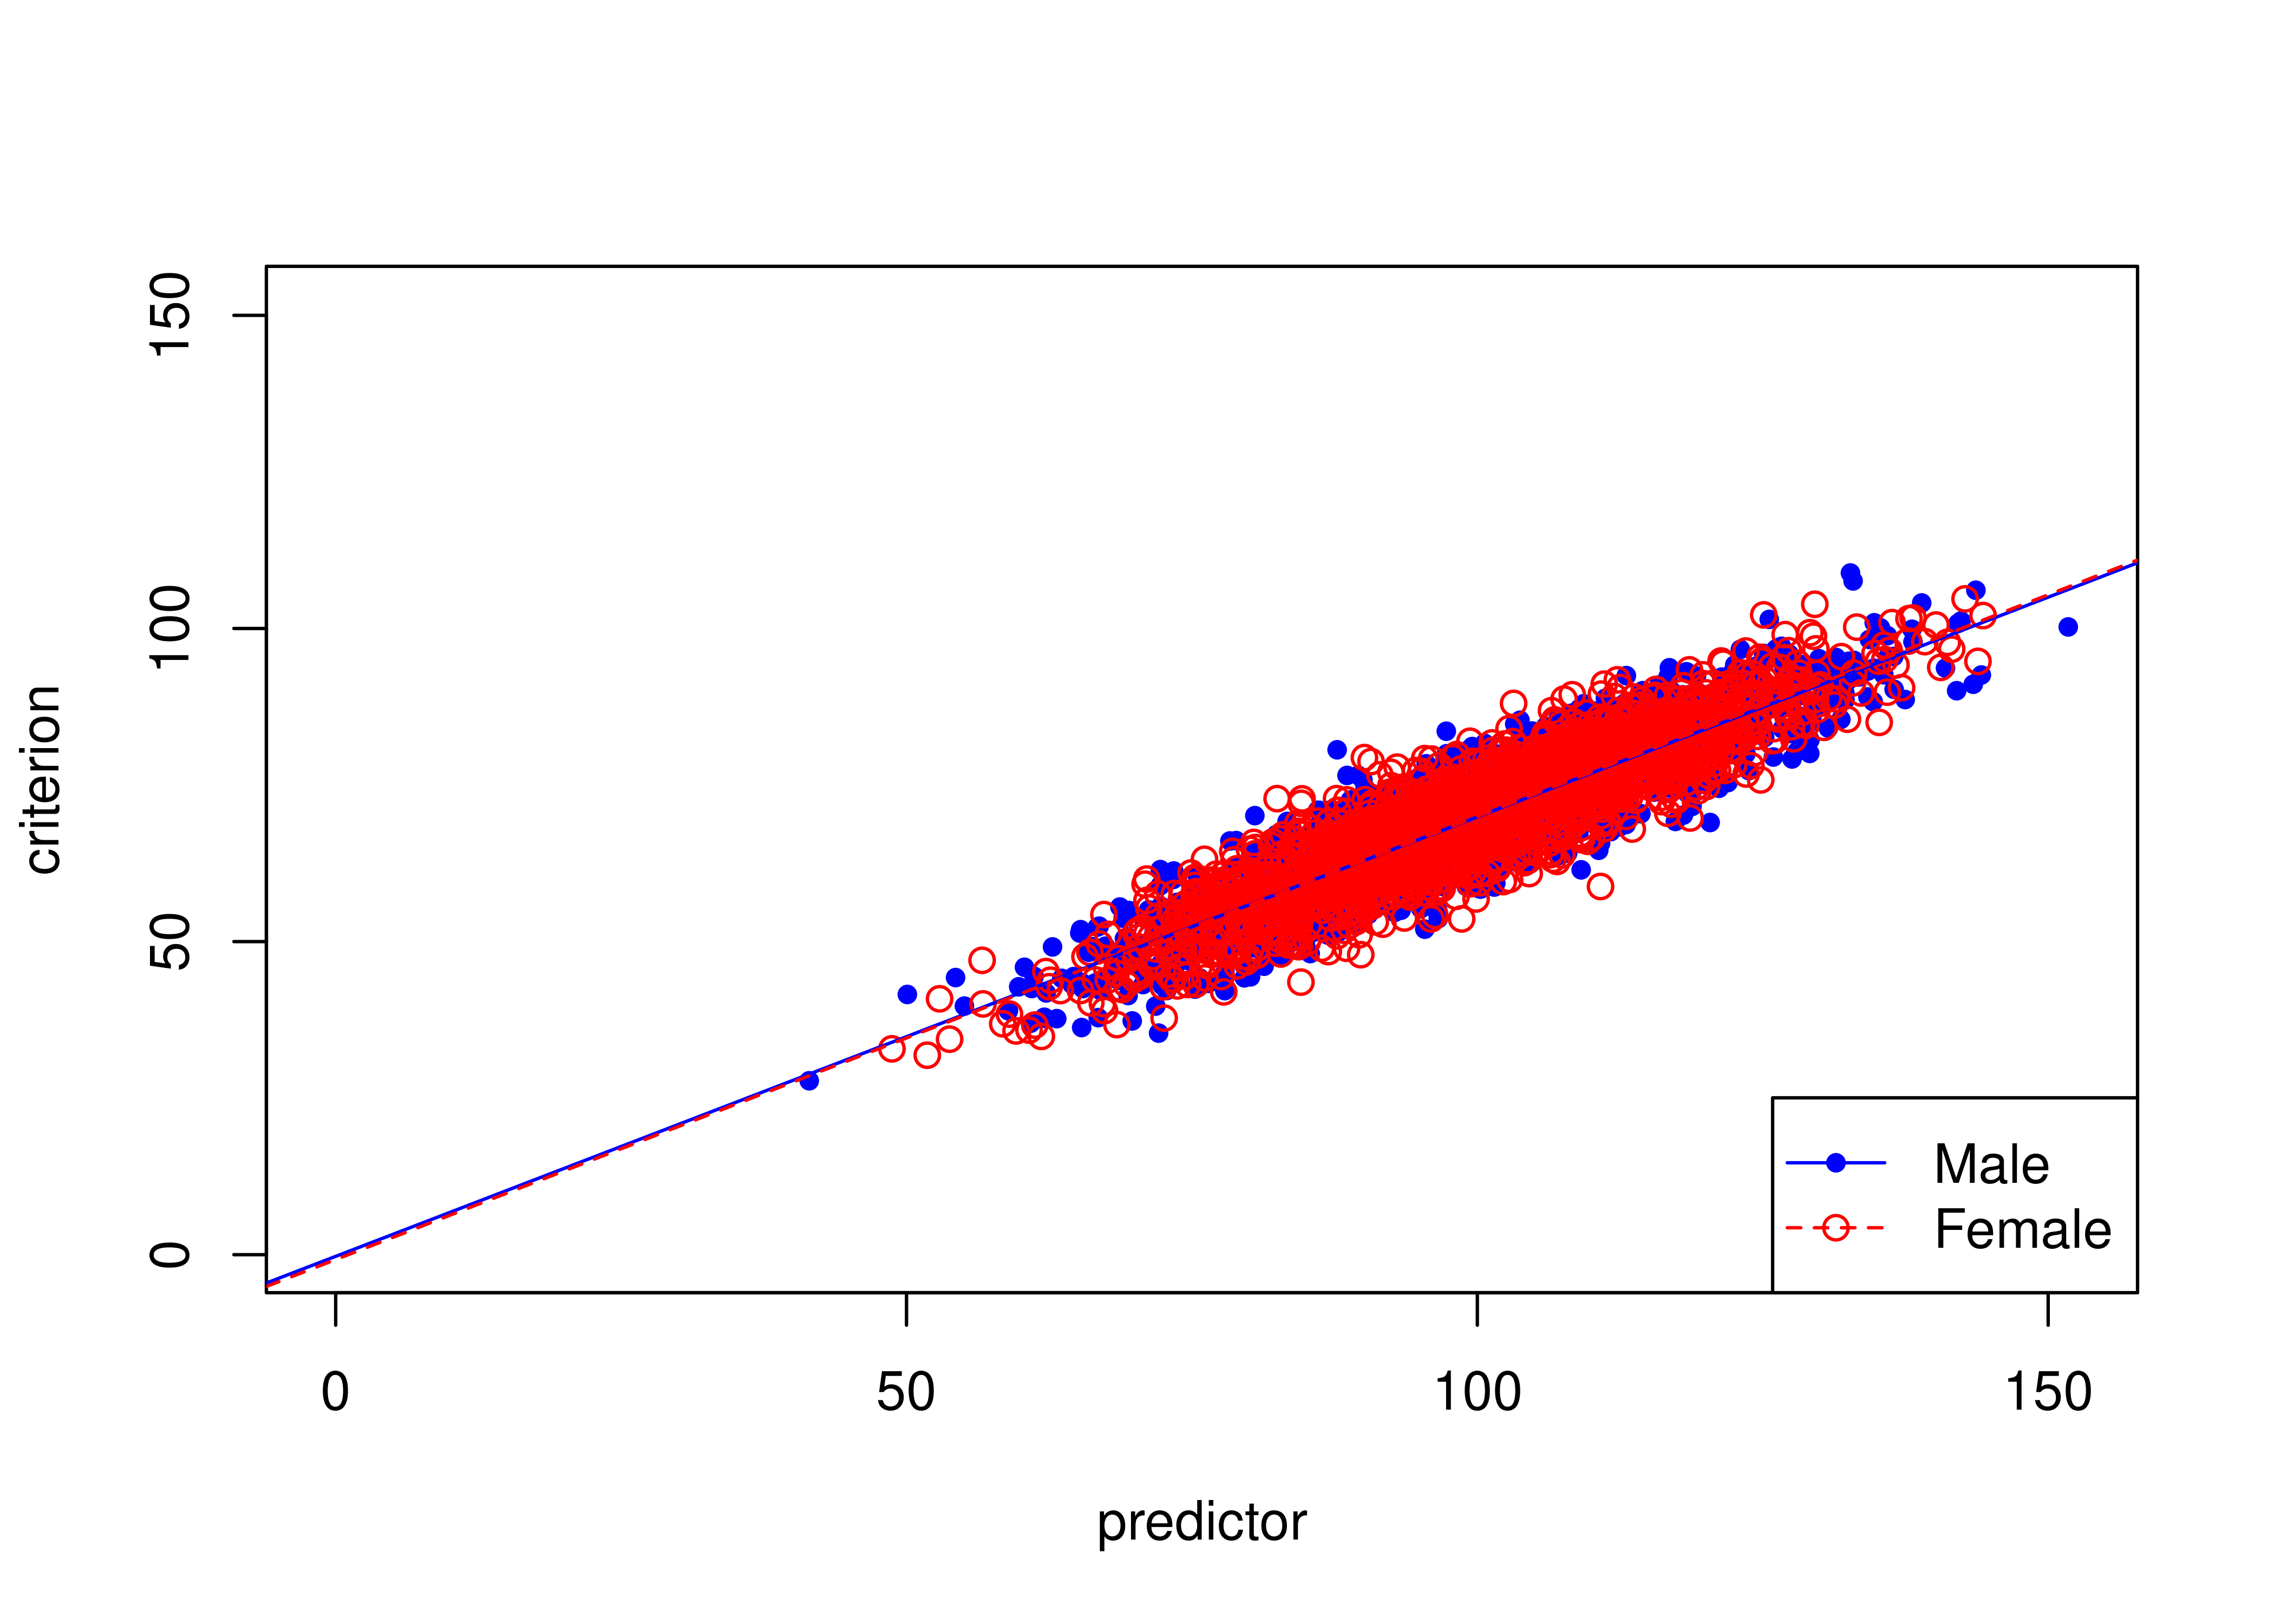 Example of Unbiased Prediction (No Differences in Intercepts or Slopes Between Males and Females).